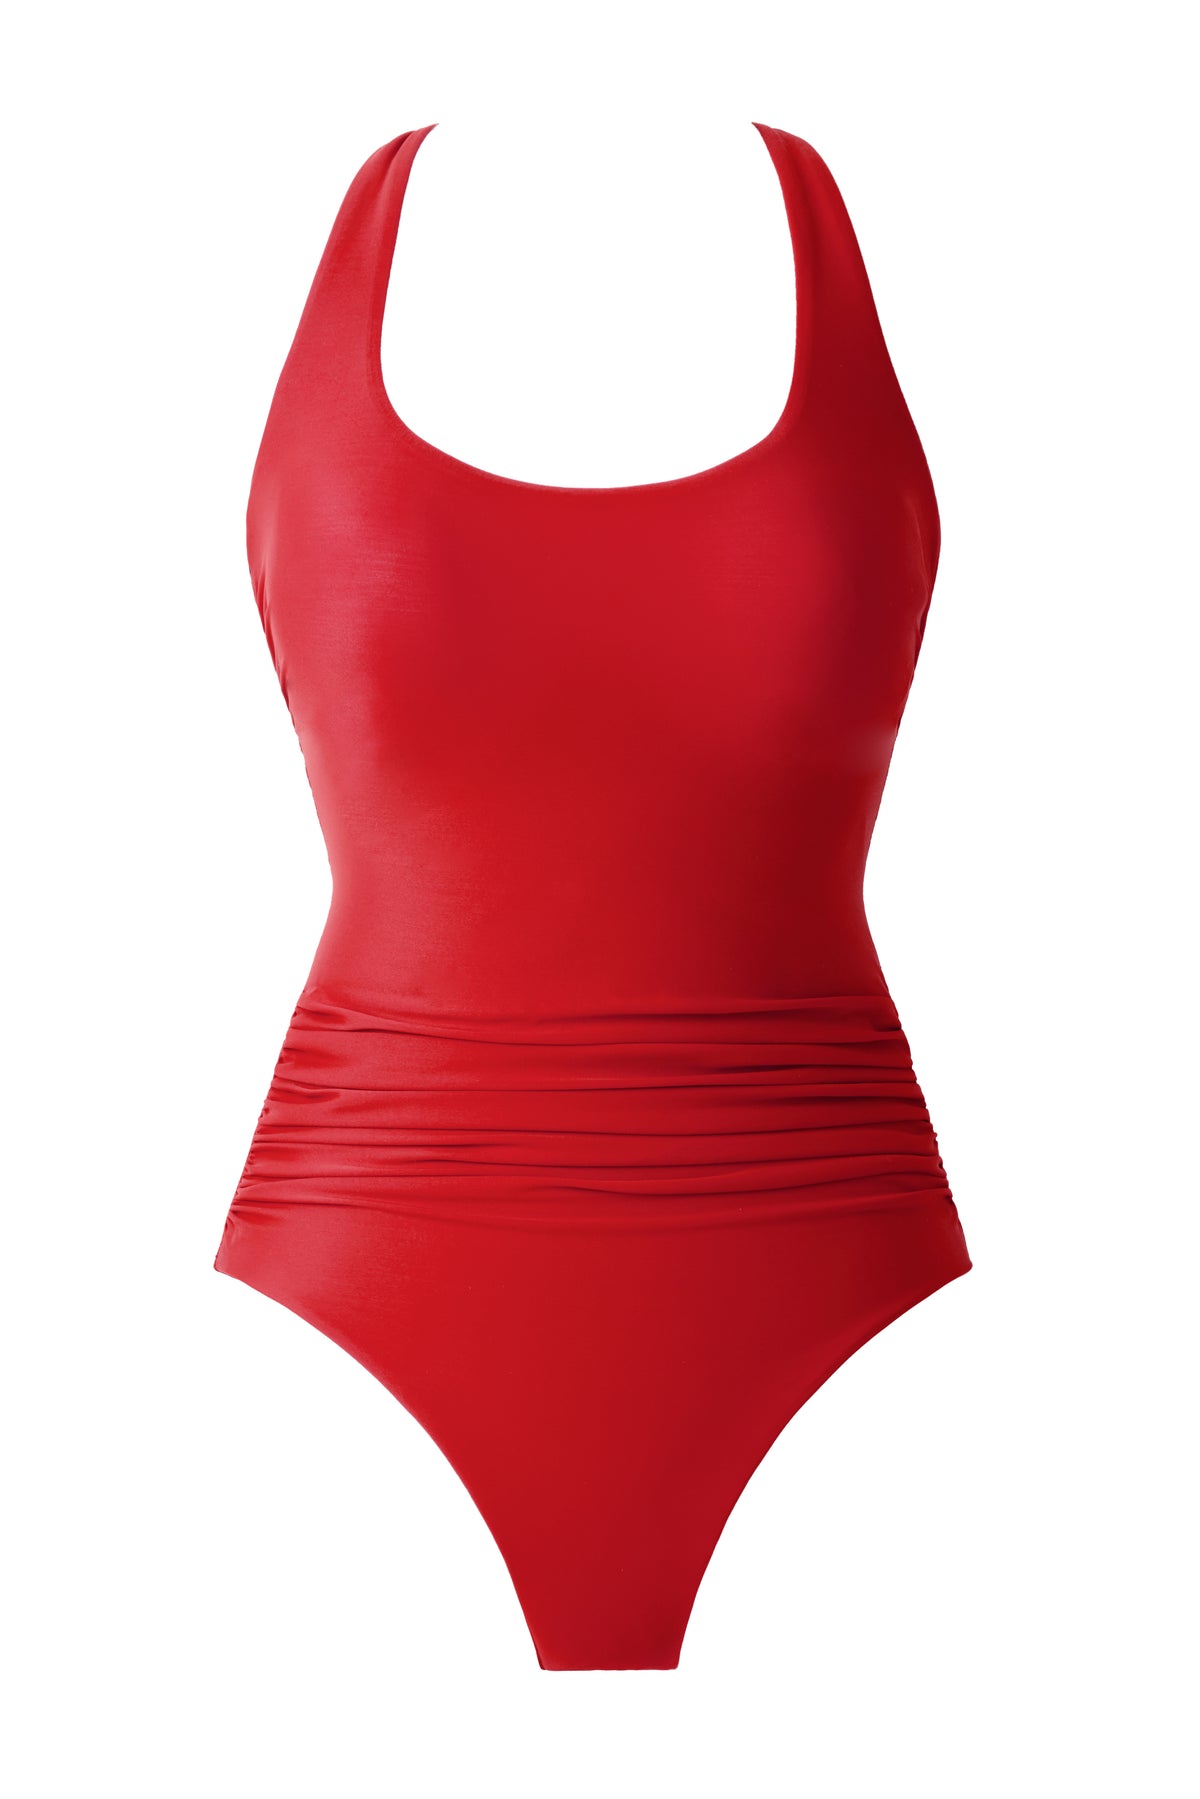 Rocksolid Utopia Red Swimsuit